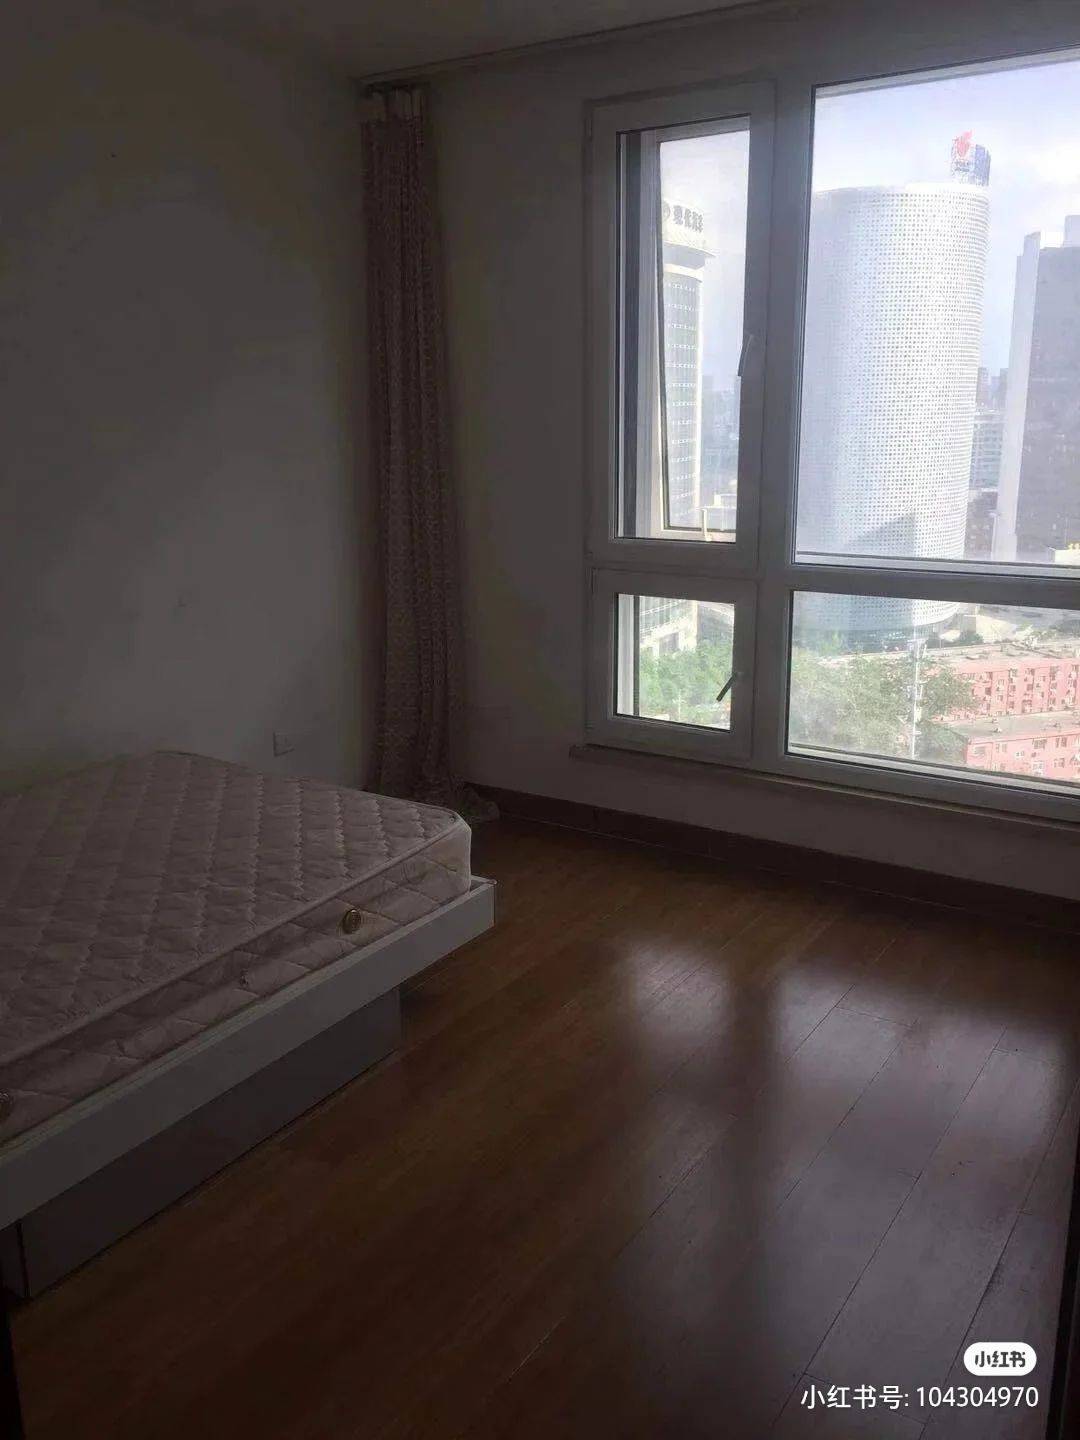 Beijing-Chaoyang-150RMB/Night,高层俯瞰北京,Cozy Home,Clean&Comfy,No Gender Limit,Chilled